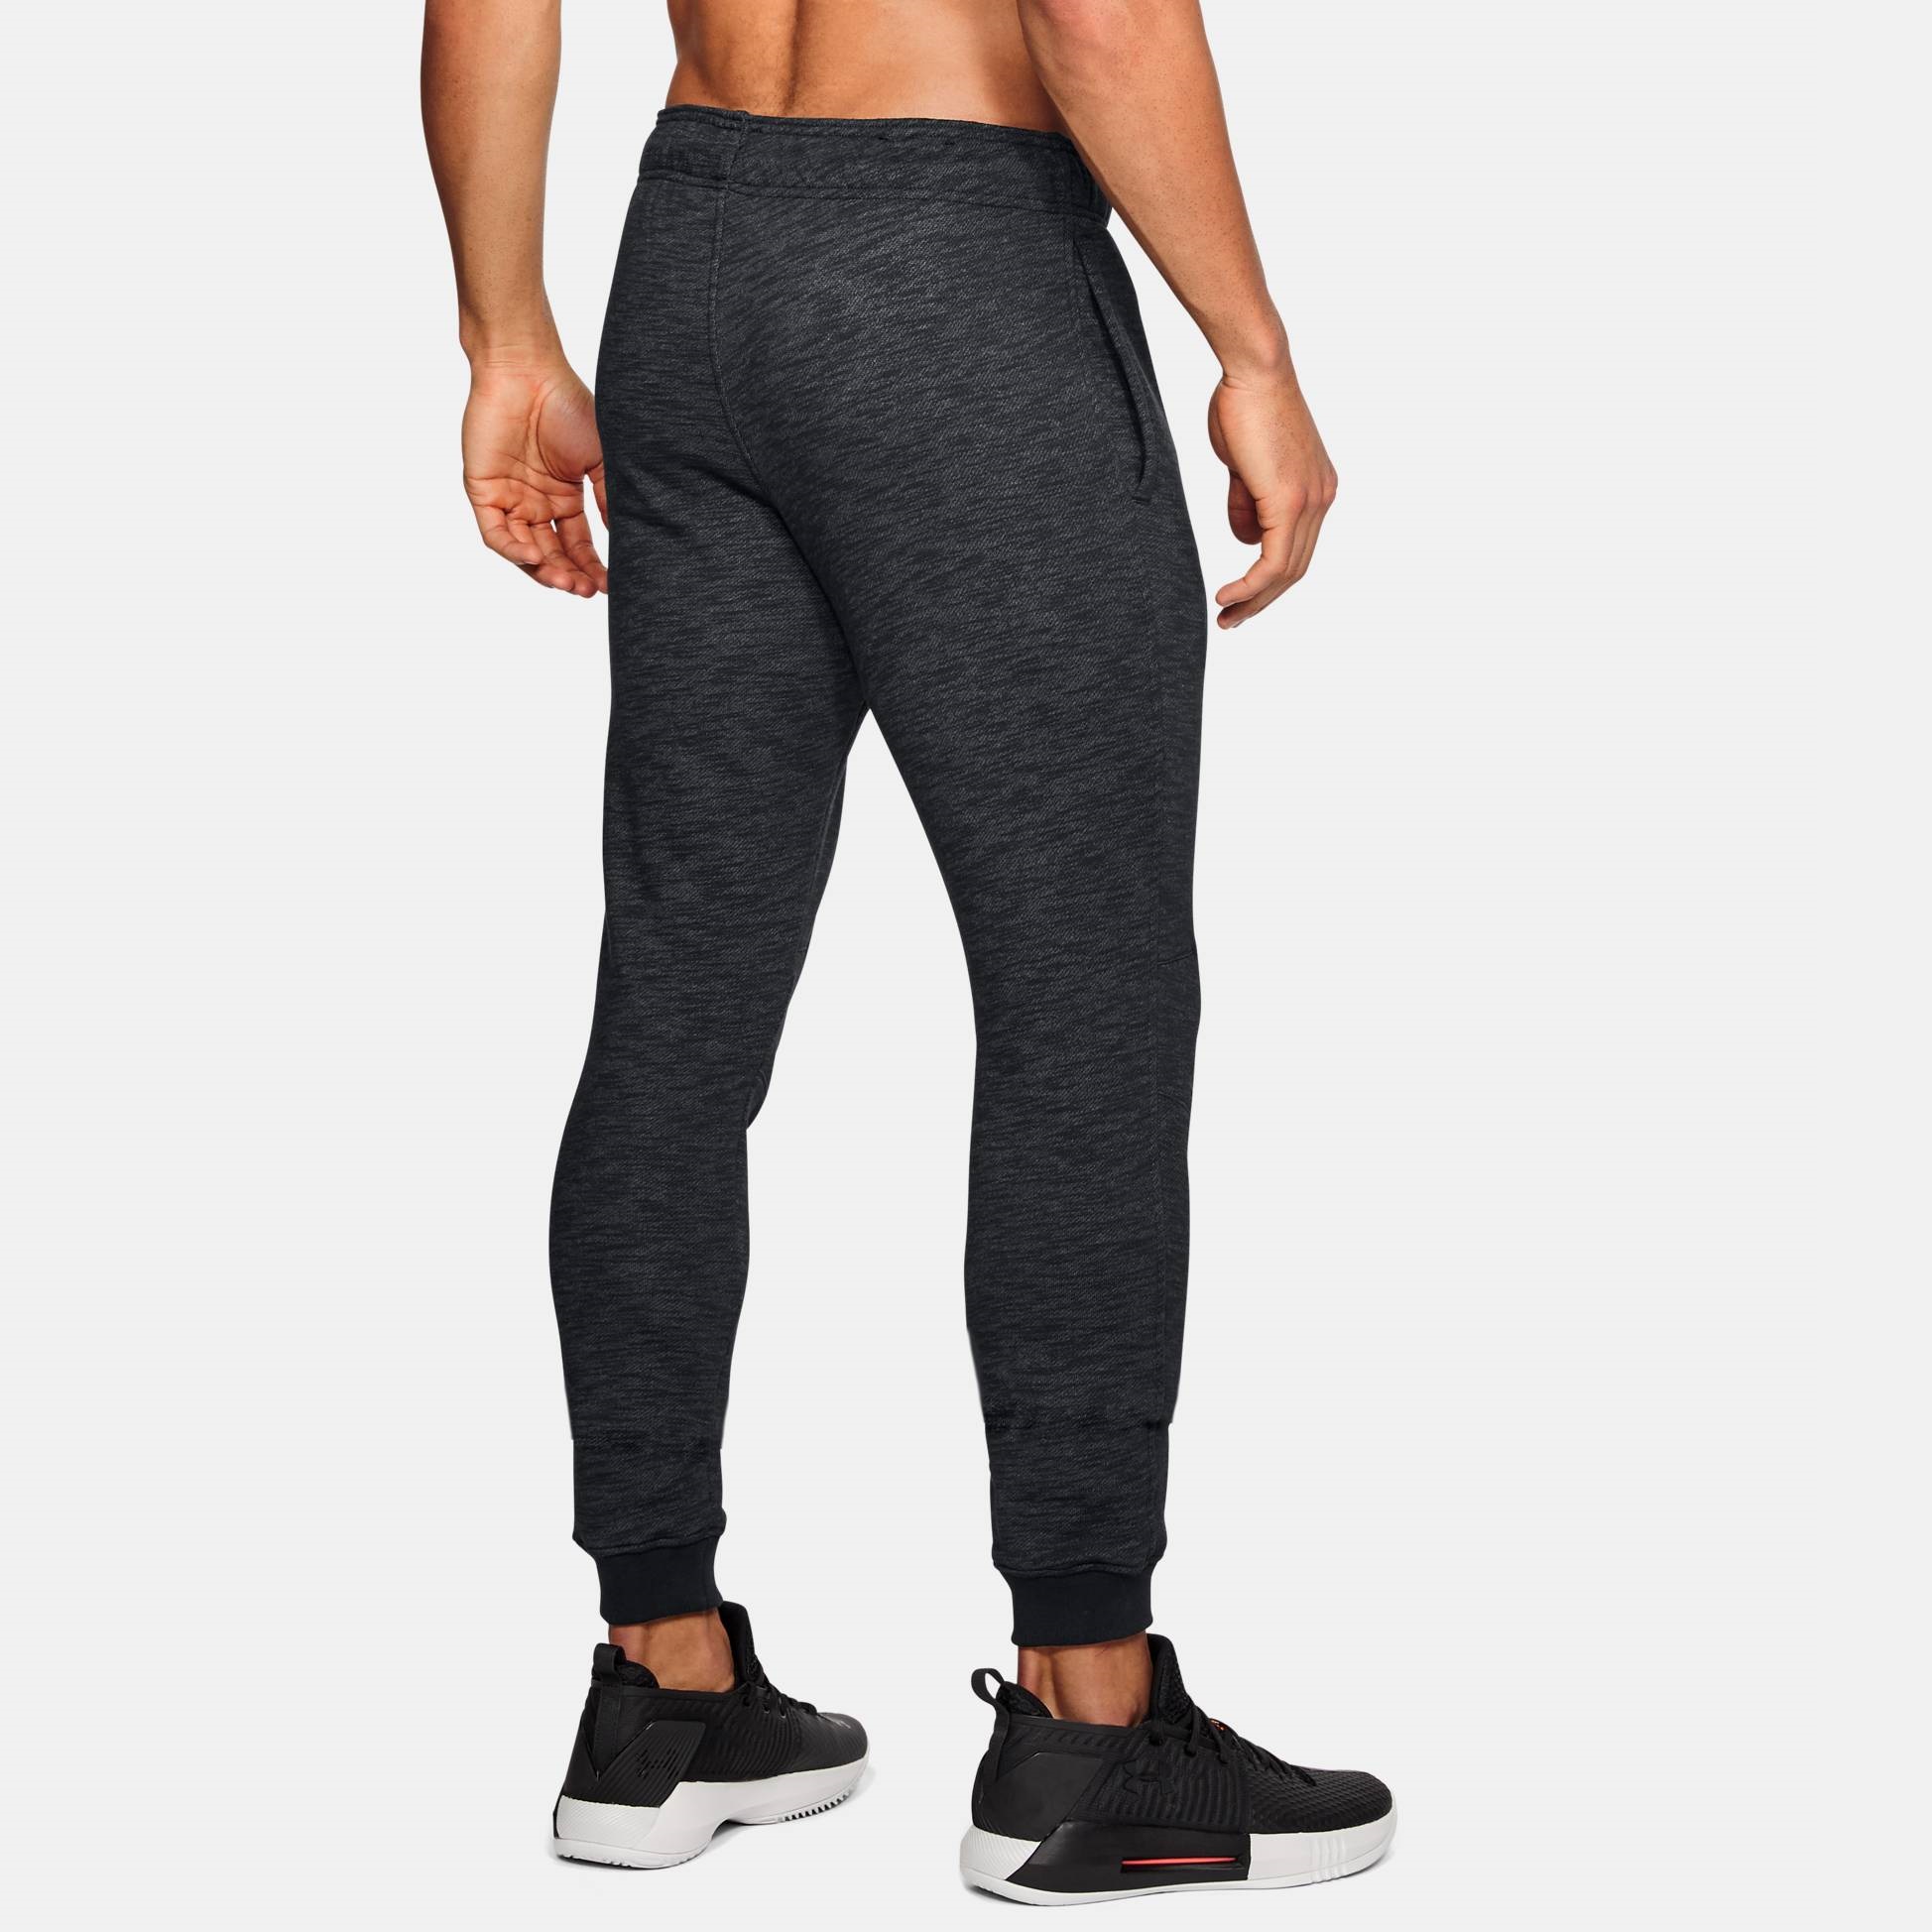  -  under armour Baseline Tapered Pants